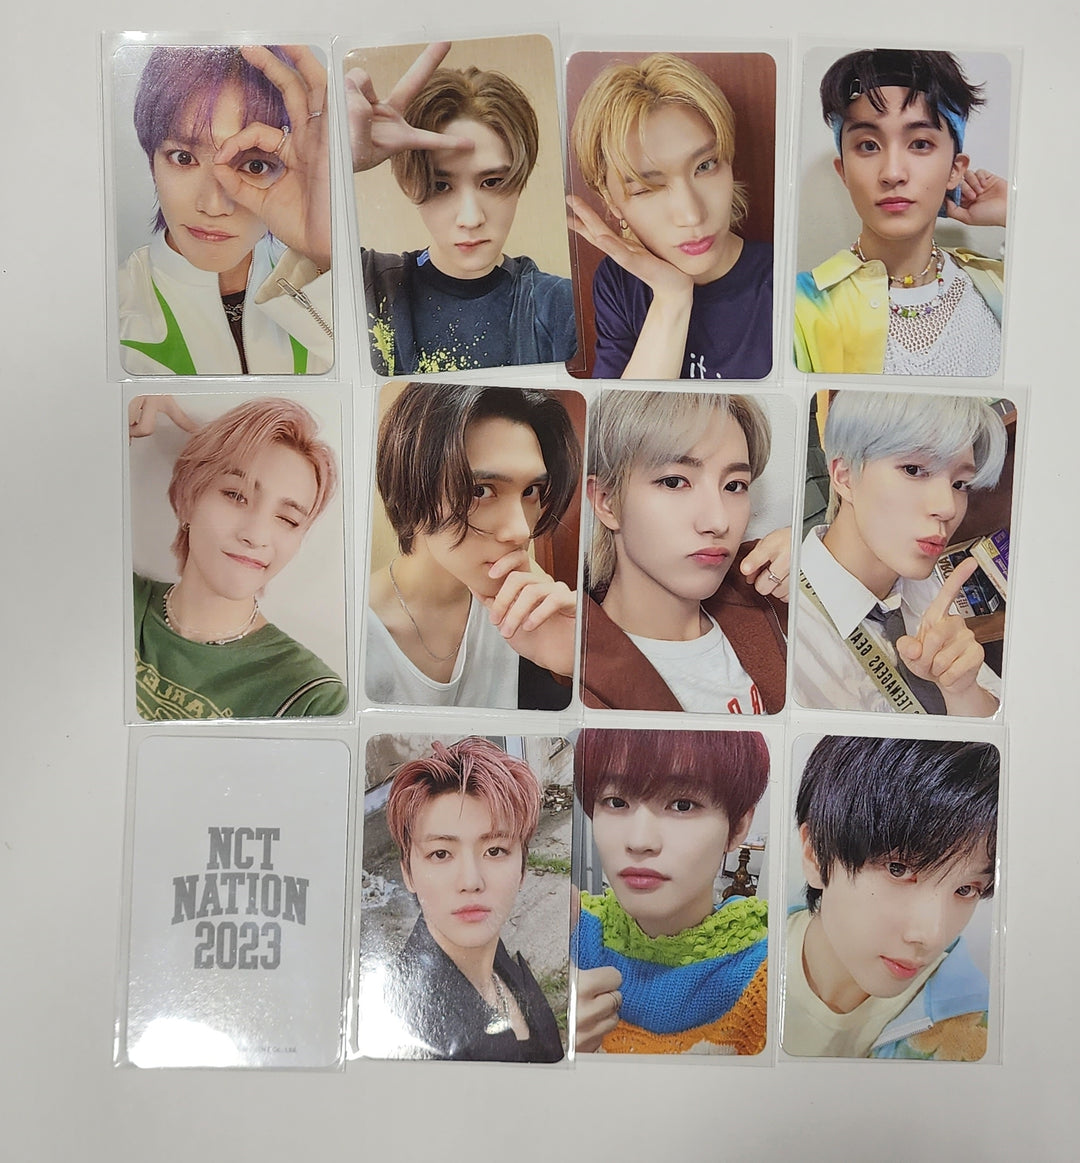 NCT - Nation 2023 Smtown MD Lucky Draw Event Photocard [23.10.23]